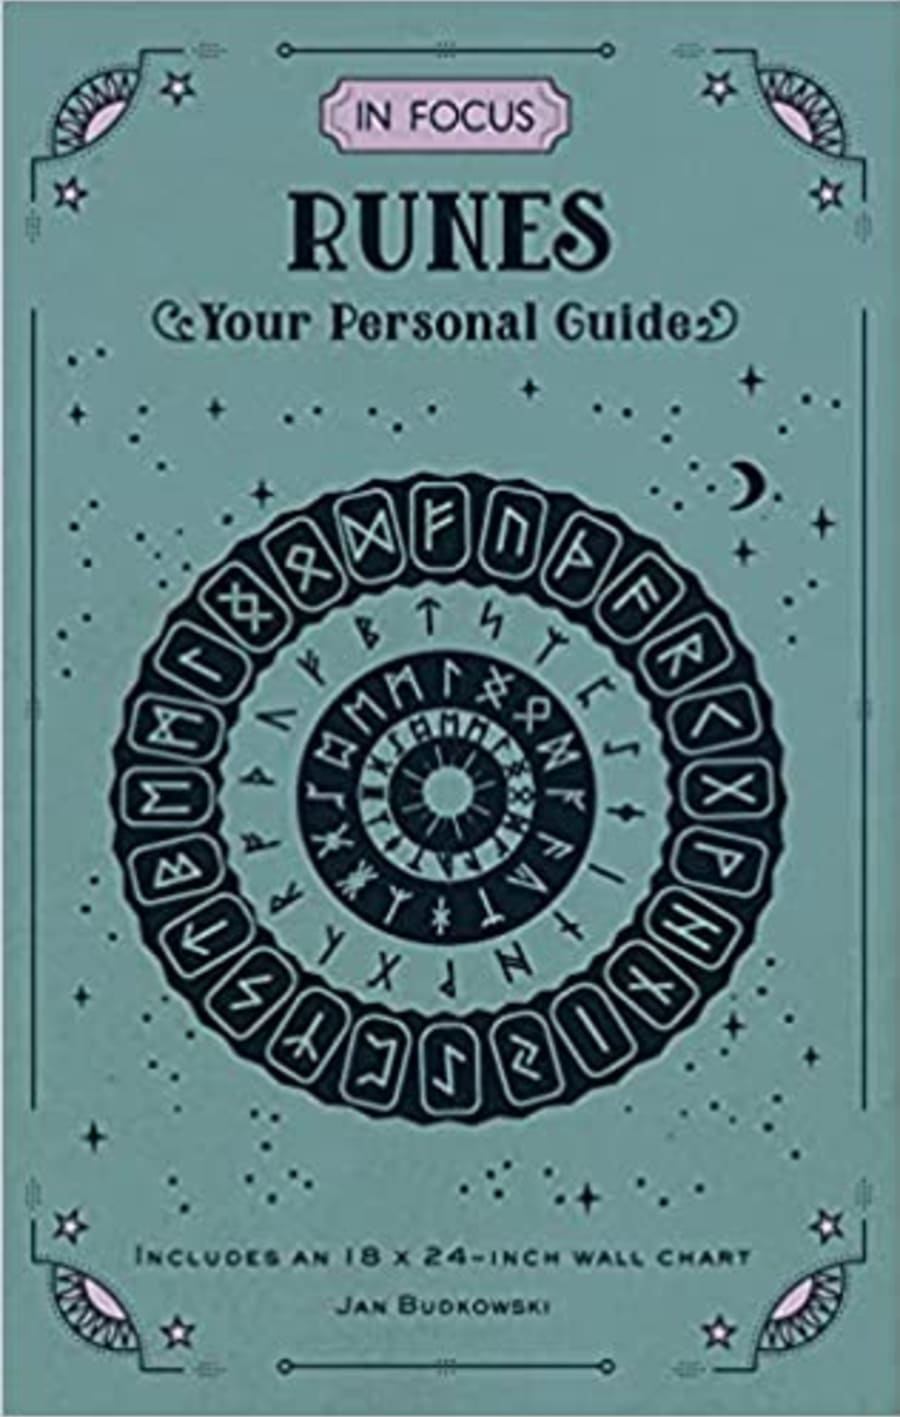 In Focus Runes : Your Personal Guide